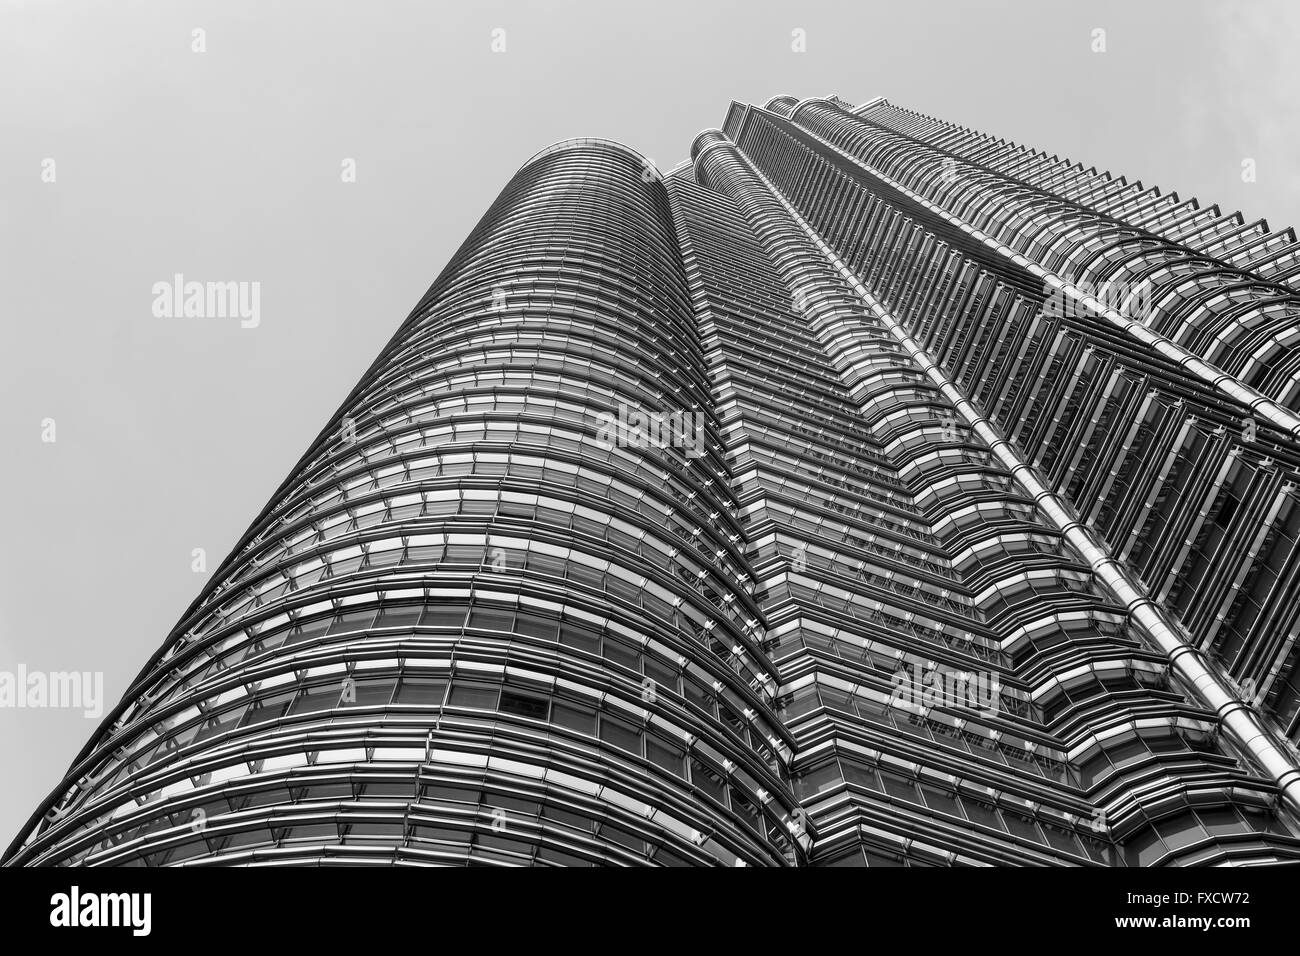 Kuala Lumpur, Malaysia - April: View of The Petronas Twin Towers and colorful water fountains Stock Photo